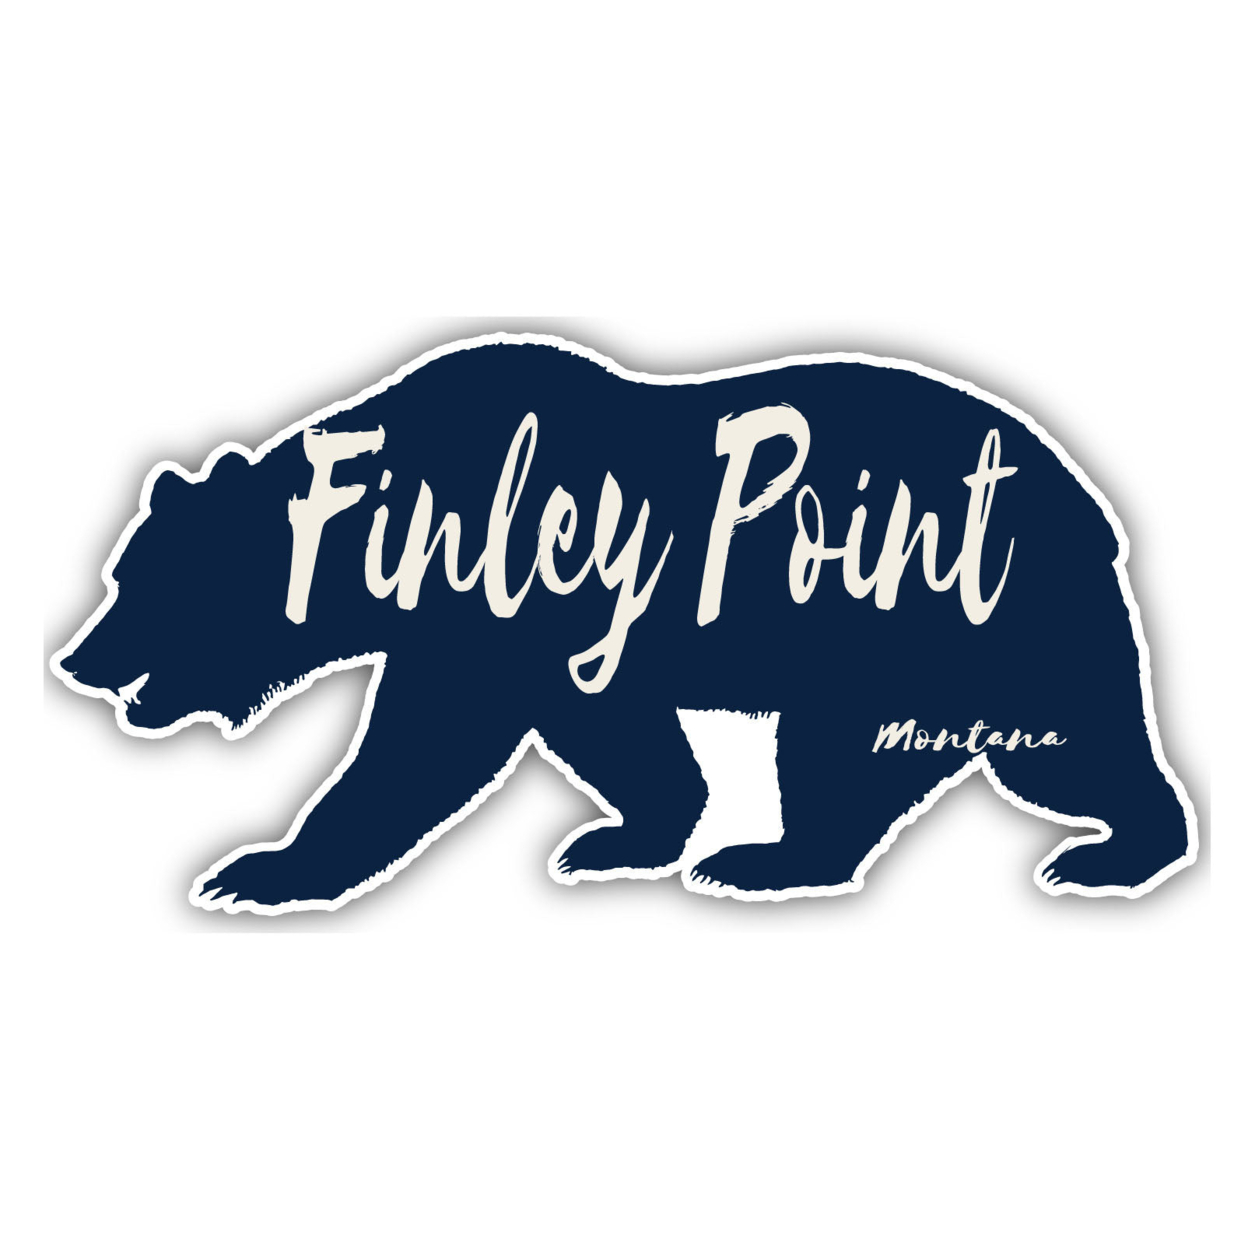 Finley Point Montana Souvenir Decorative Stickers (Choose Theme And Size) - 4-Pack, 4-Inch, Bear